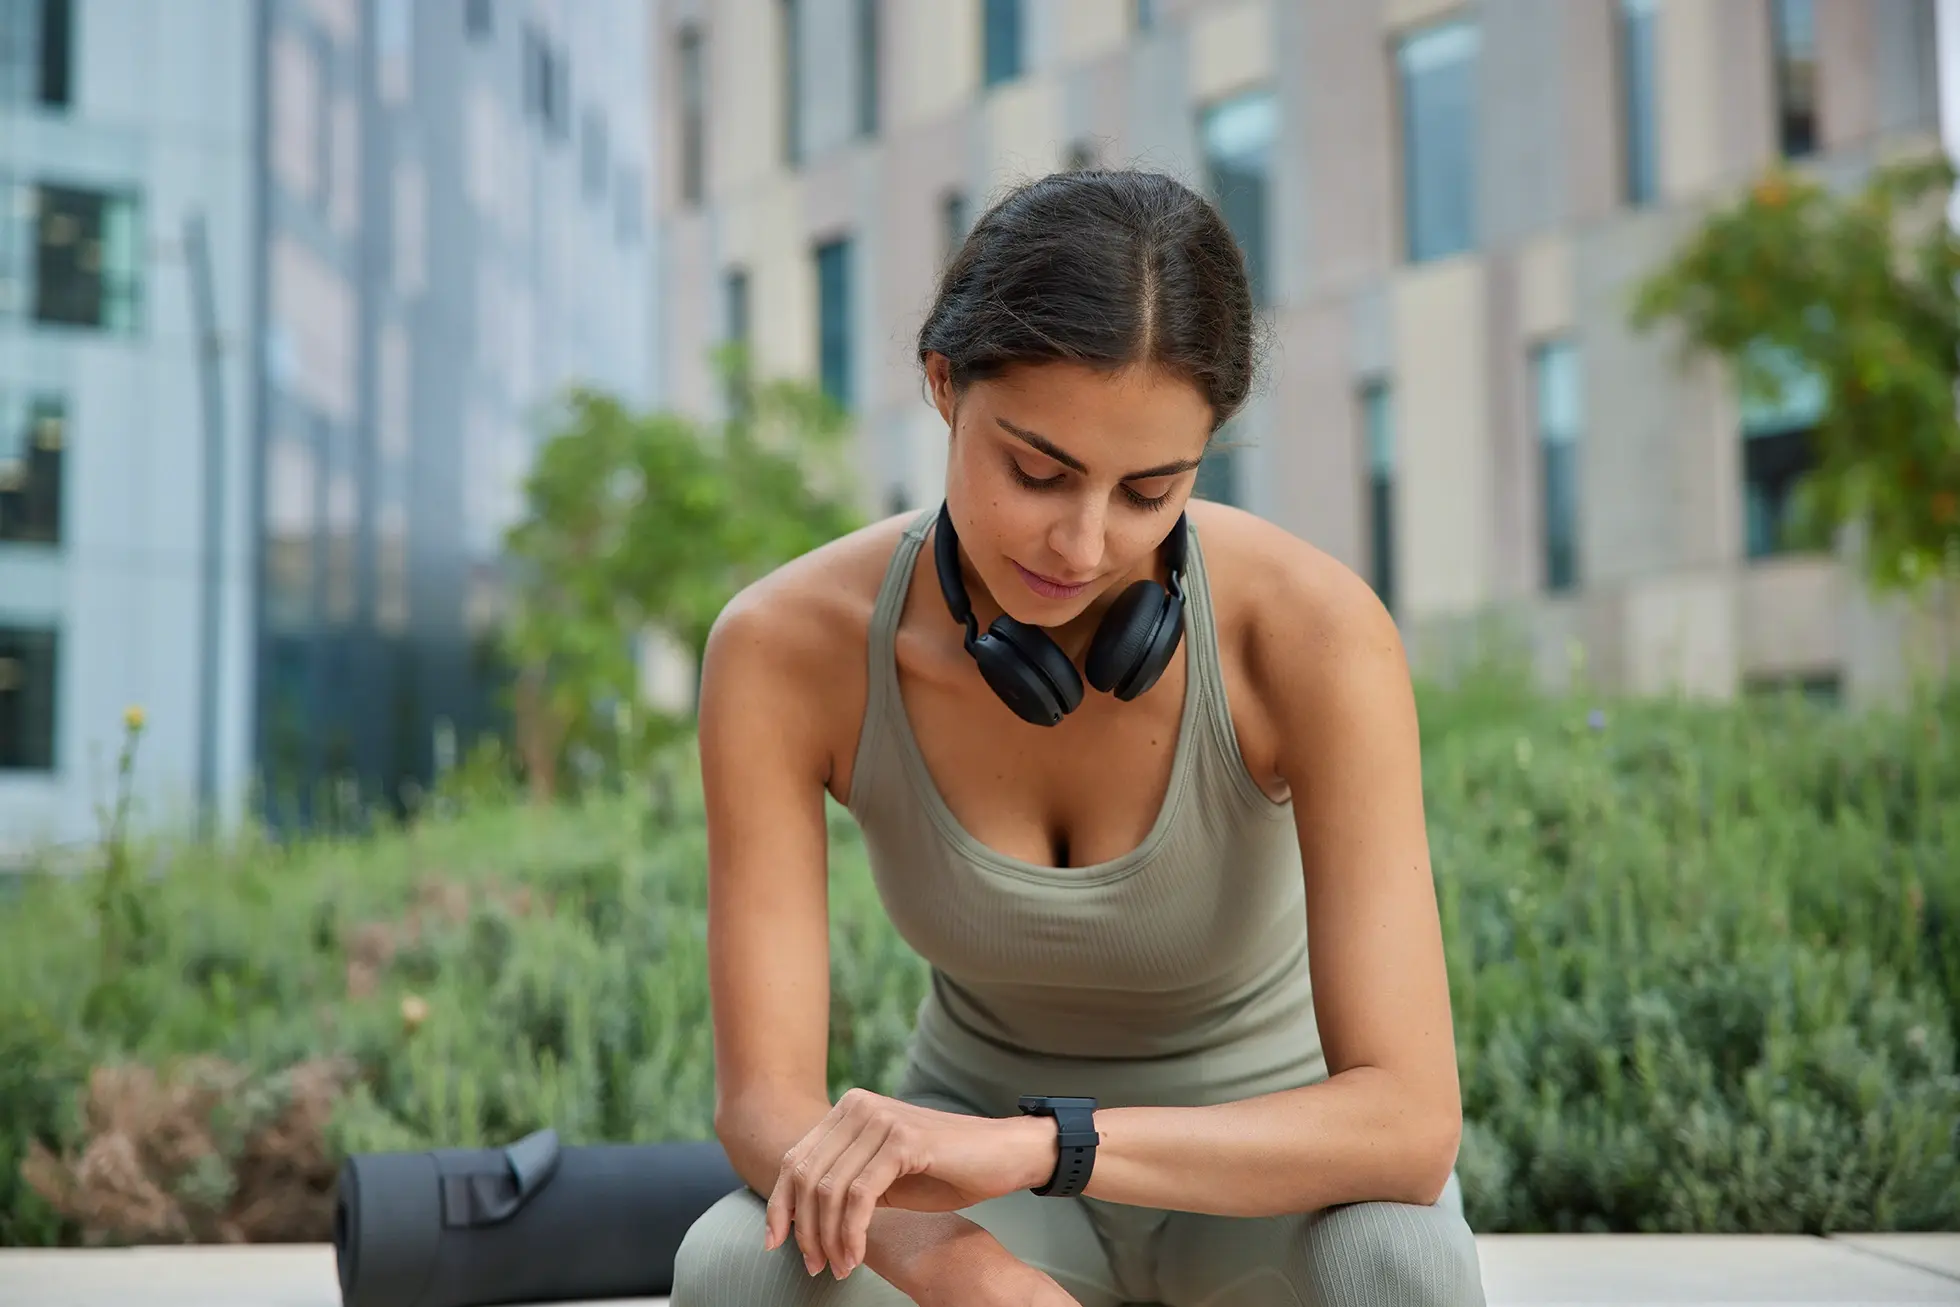 A woman wearing a smart watch sitting on an outdoor bench.